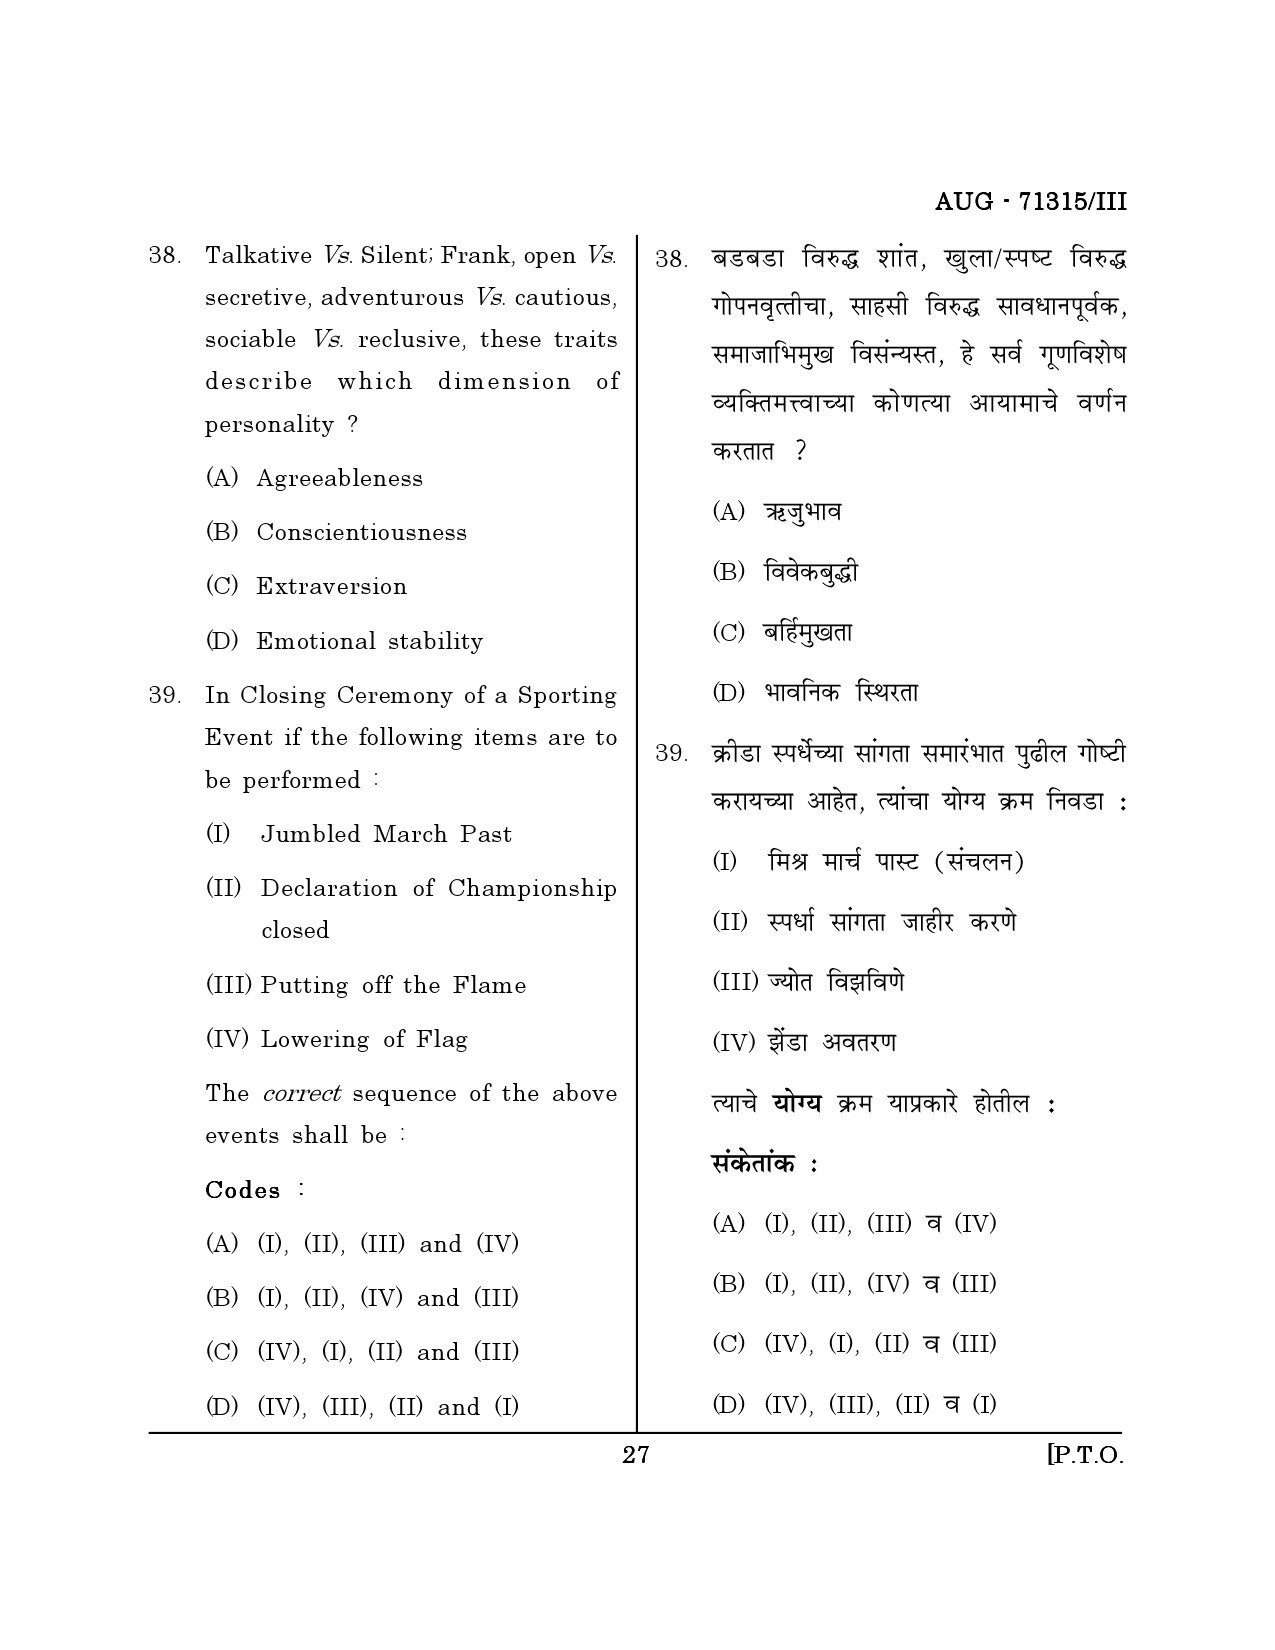 Maharashtra SET Physical Education Question Paper III August 2015 26